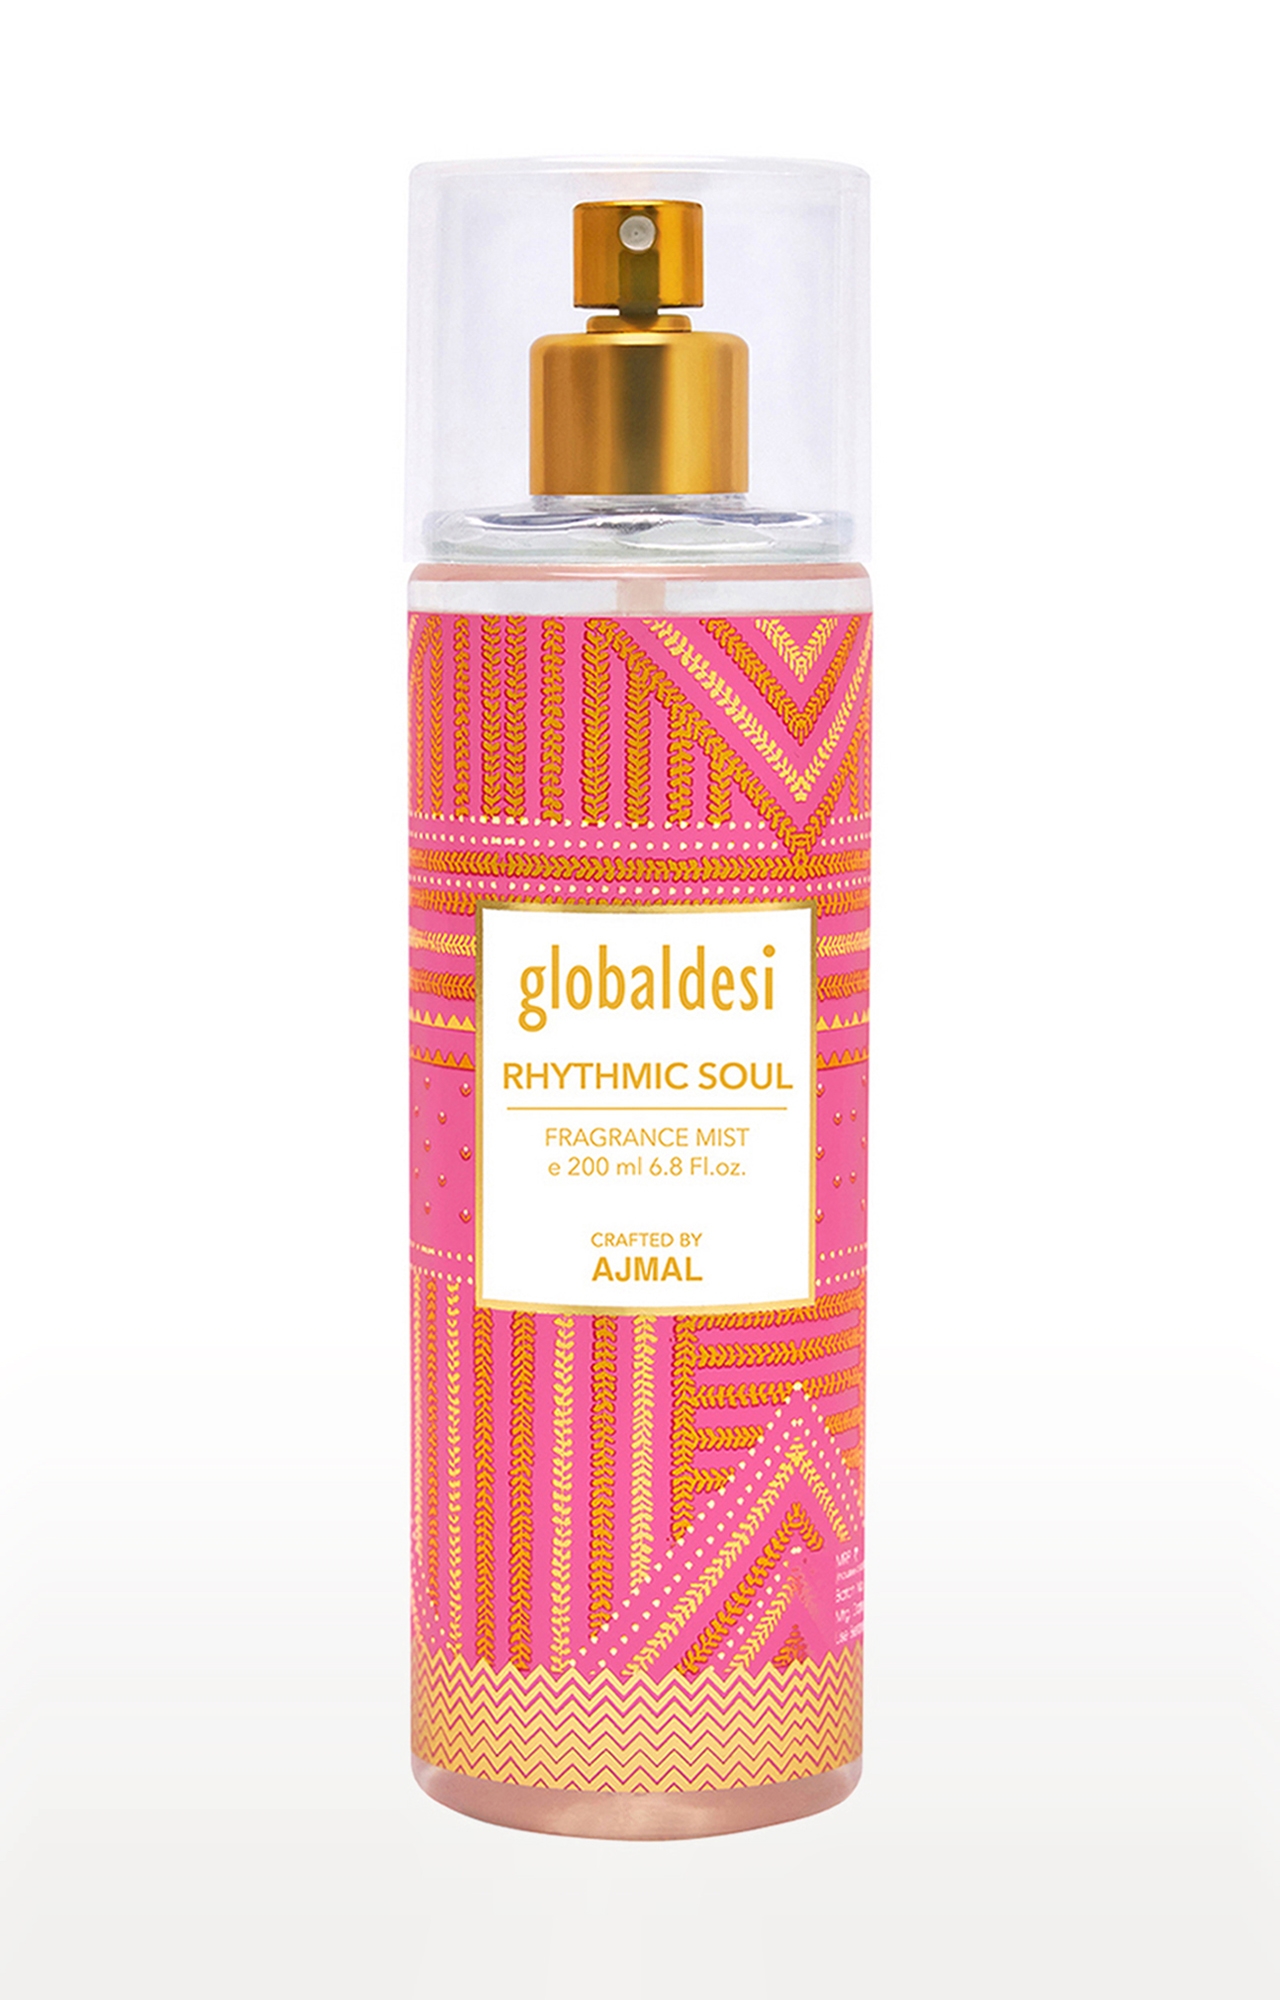 Global Desi Crafted By Ajmal | Global Desi Rhythmic Soul Body Mist Perfume 200ML Long Lasting Scent Spray Gift For Women Crafted by Ajmal  0